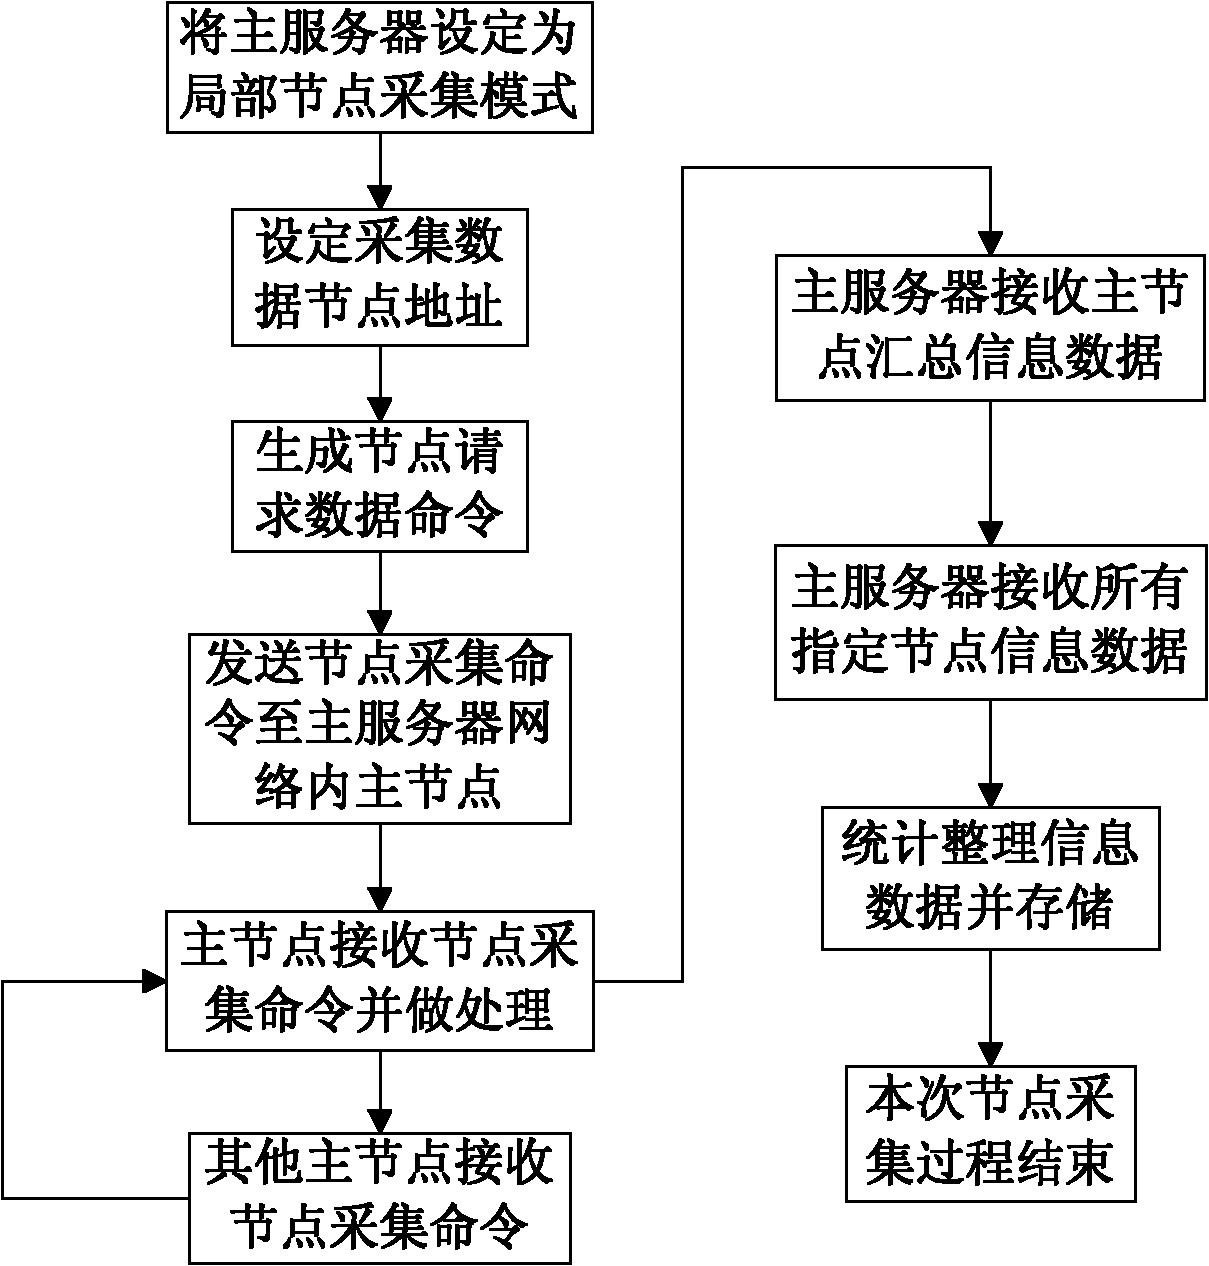 Information acquisition system based on Bluetooth Ad Hoc network